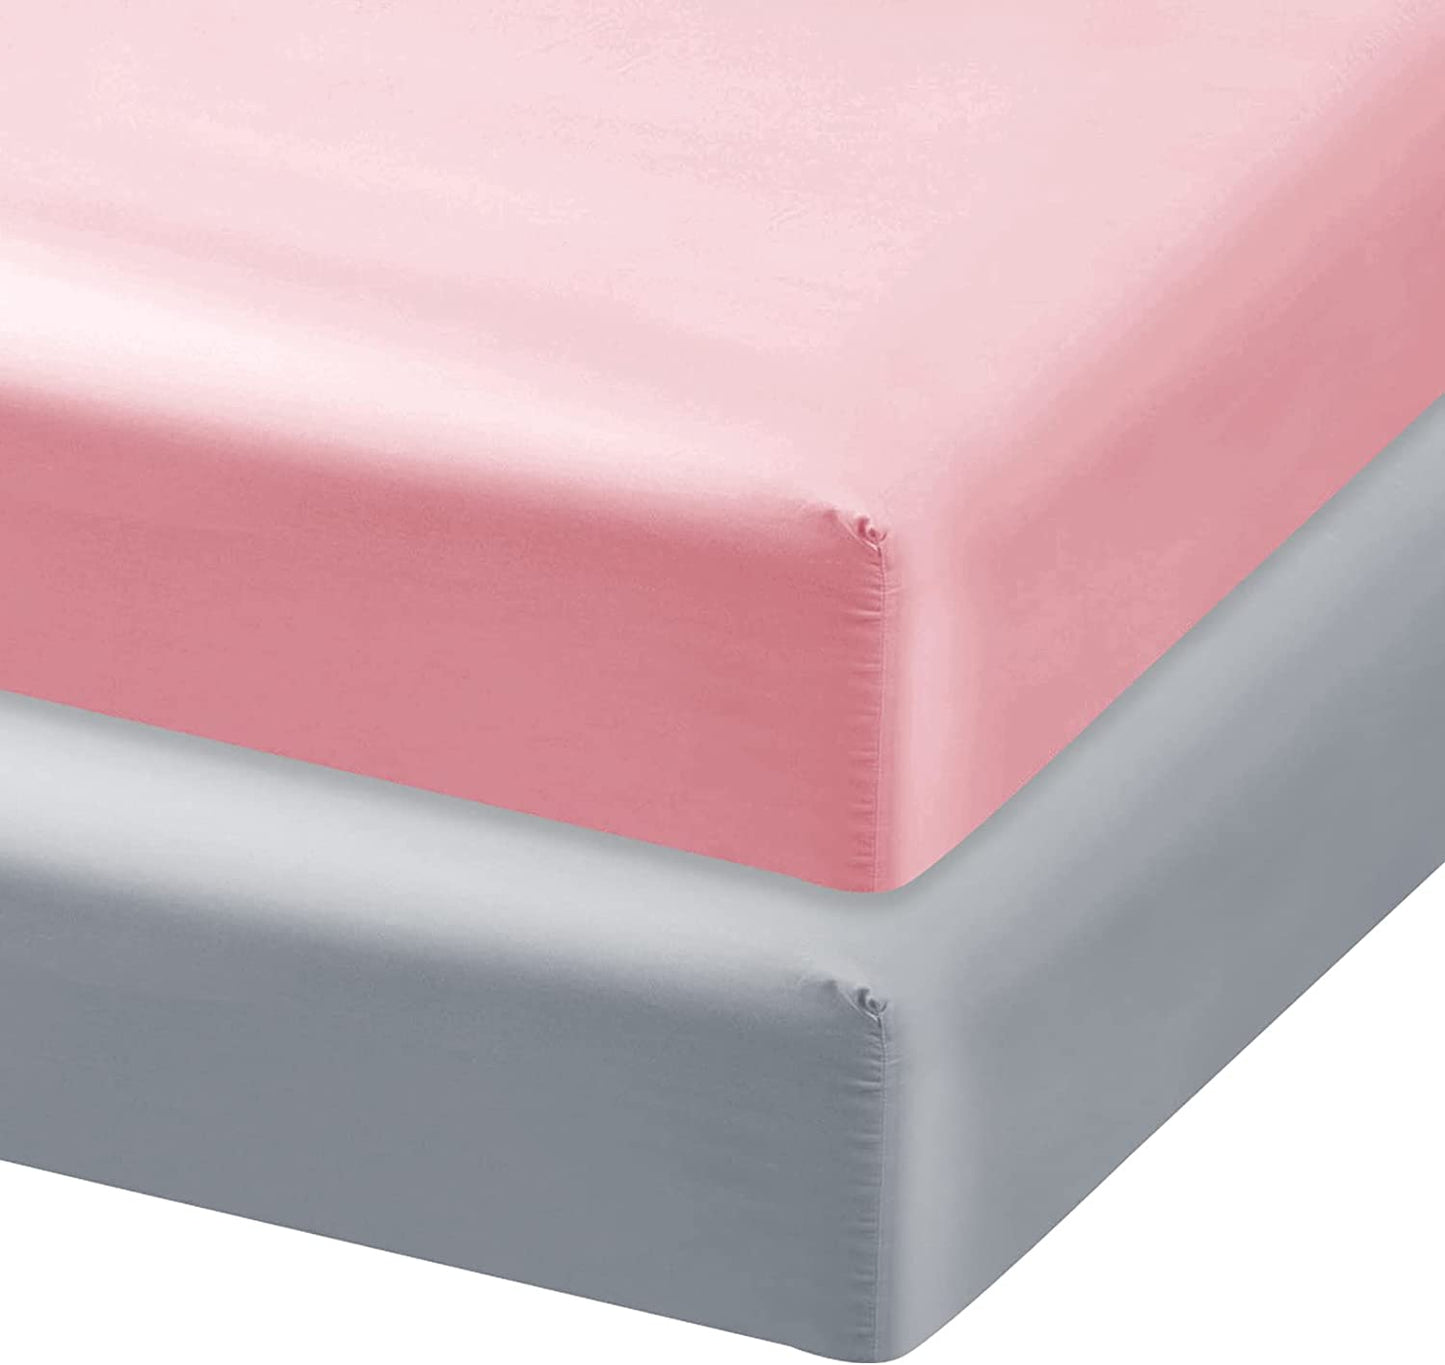 Pack n Play Fitted Sheet - 2 Pack, 100% Satin, Super Soft and Silky, Pink & Grey - Biloban Online Store